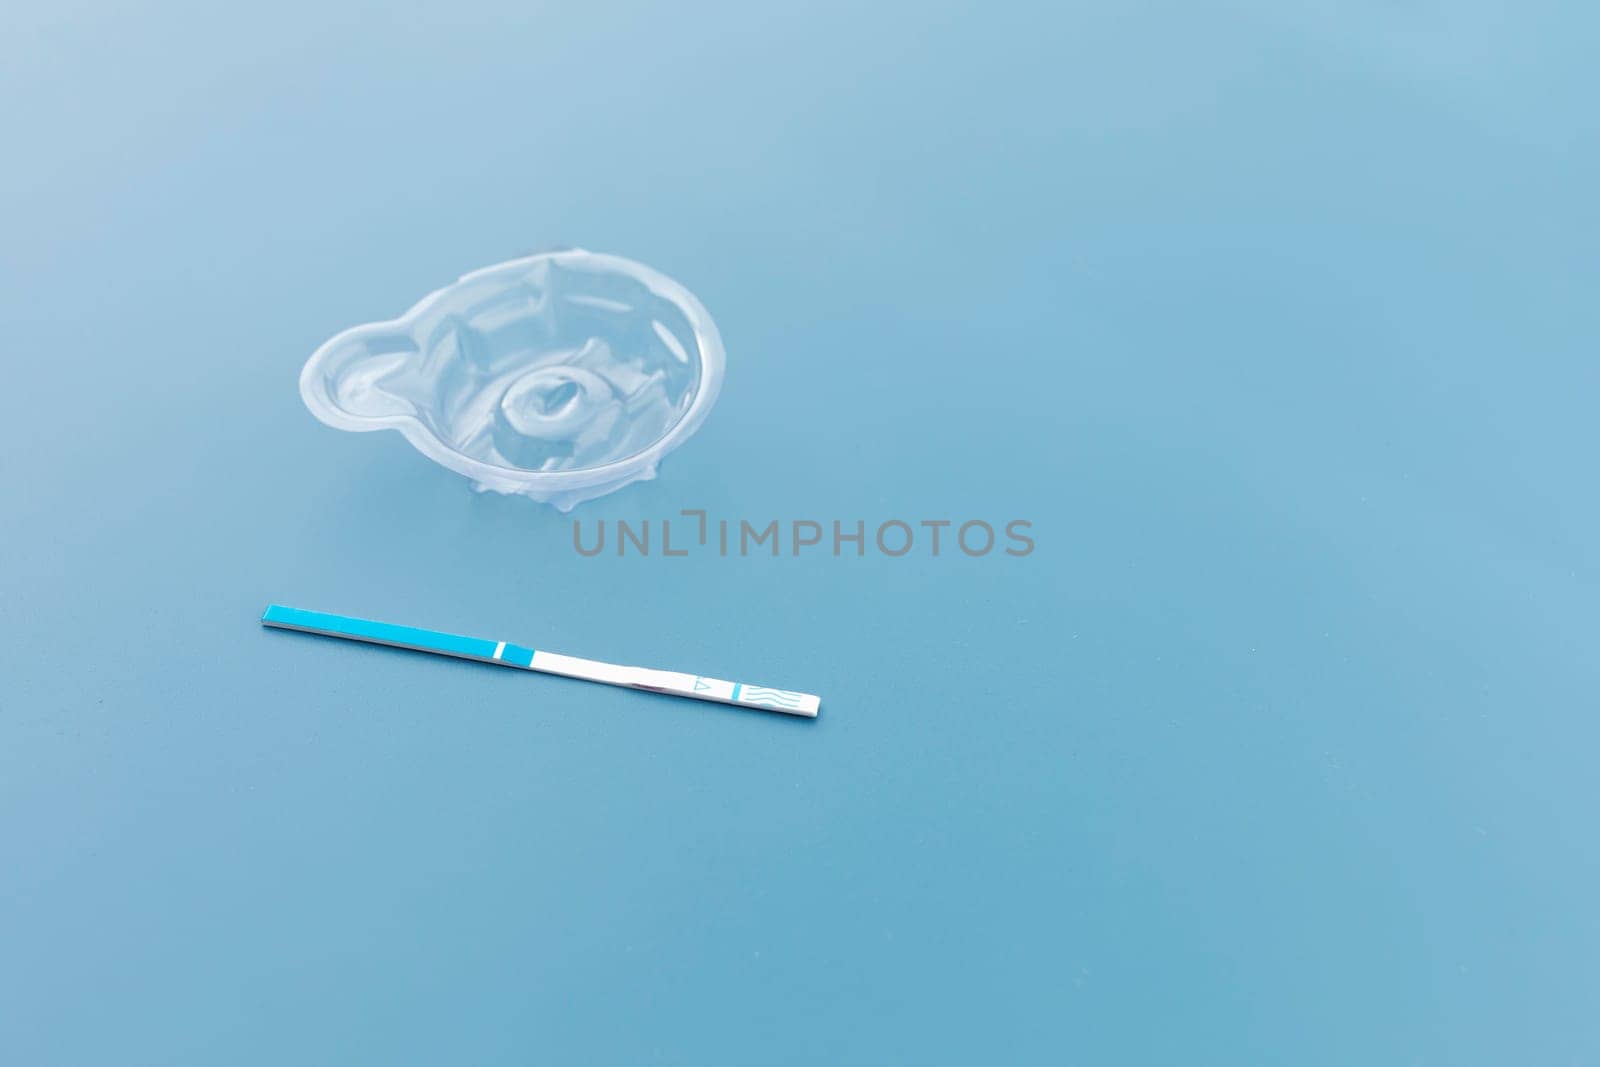 Mockup Ovulation Urine Test Strip with Cup on Blue Background, Copy Space For Text. Pregnancy stick test Template. Pregnancy, Childbirth. Home-use Test Kit to Measure Luteinizing. Horizontal Plane.